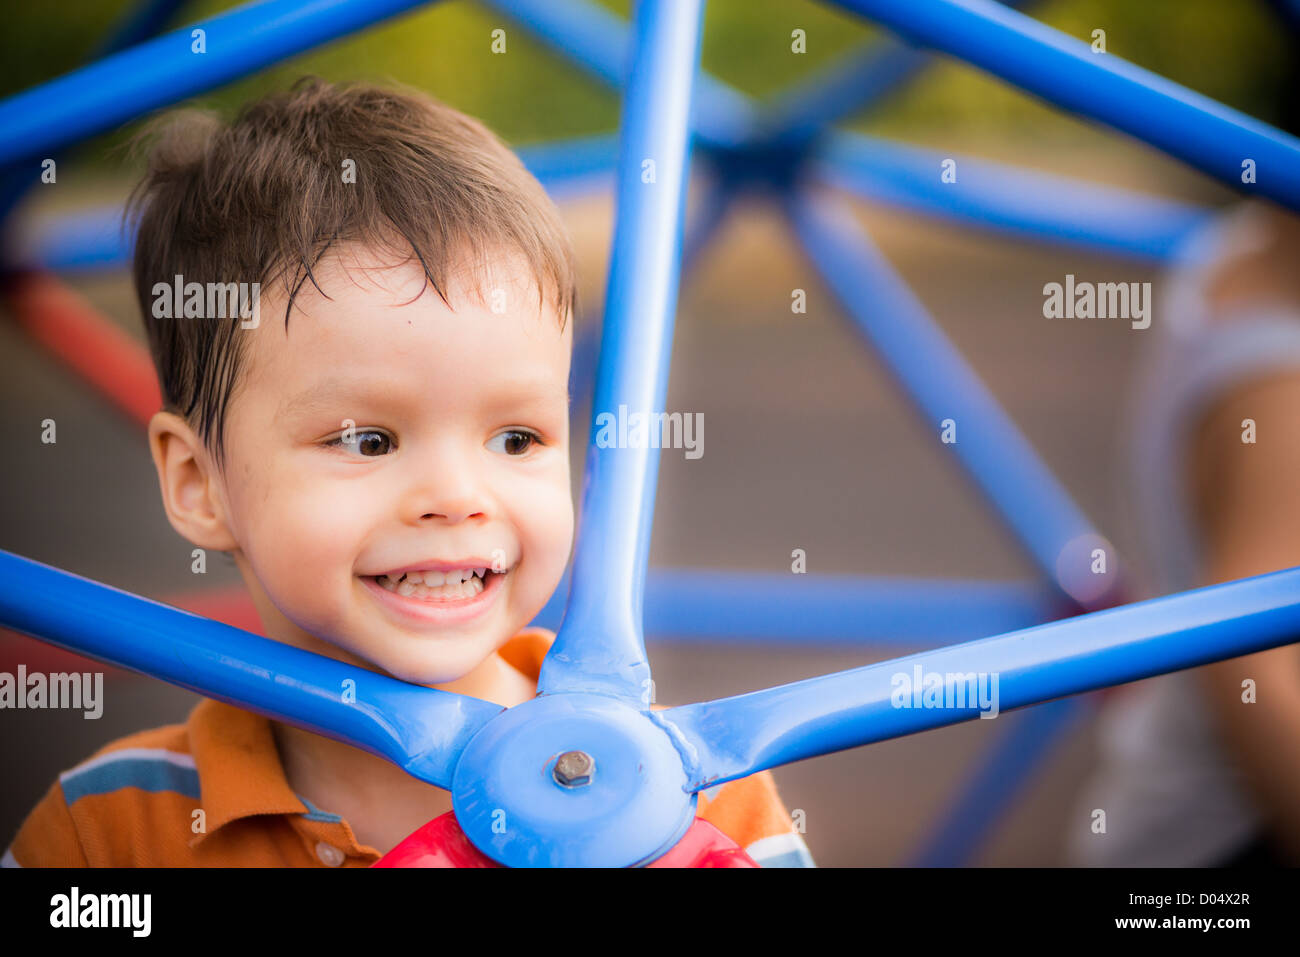 A cheerful 2 year old boy plays on blue monkey bars in outdoor playground Stock Photo